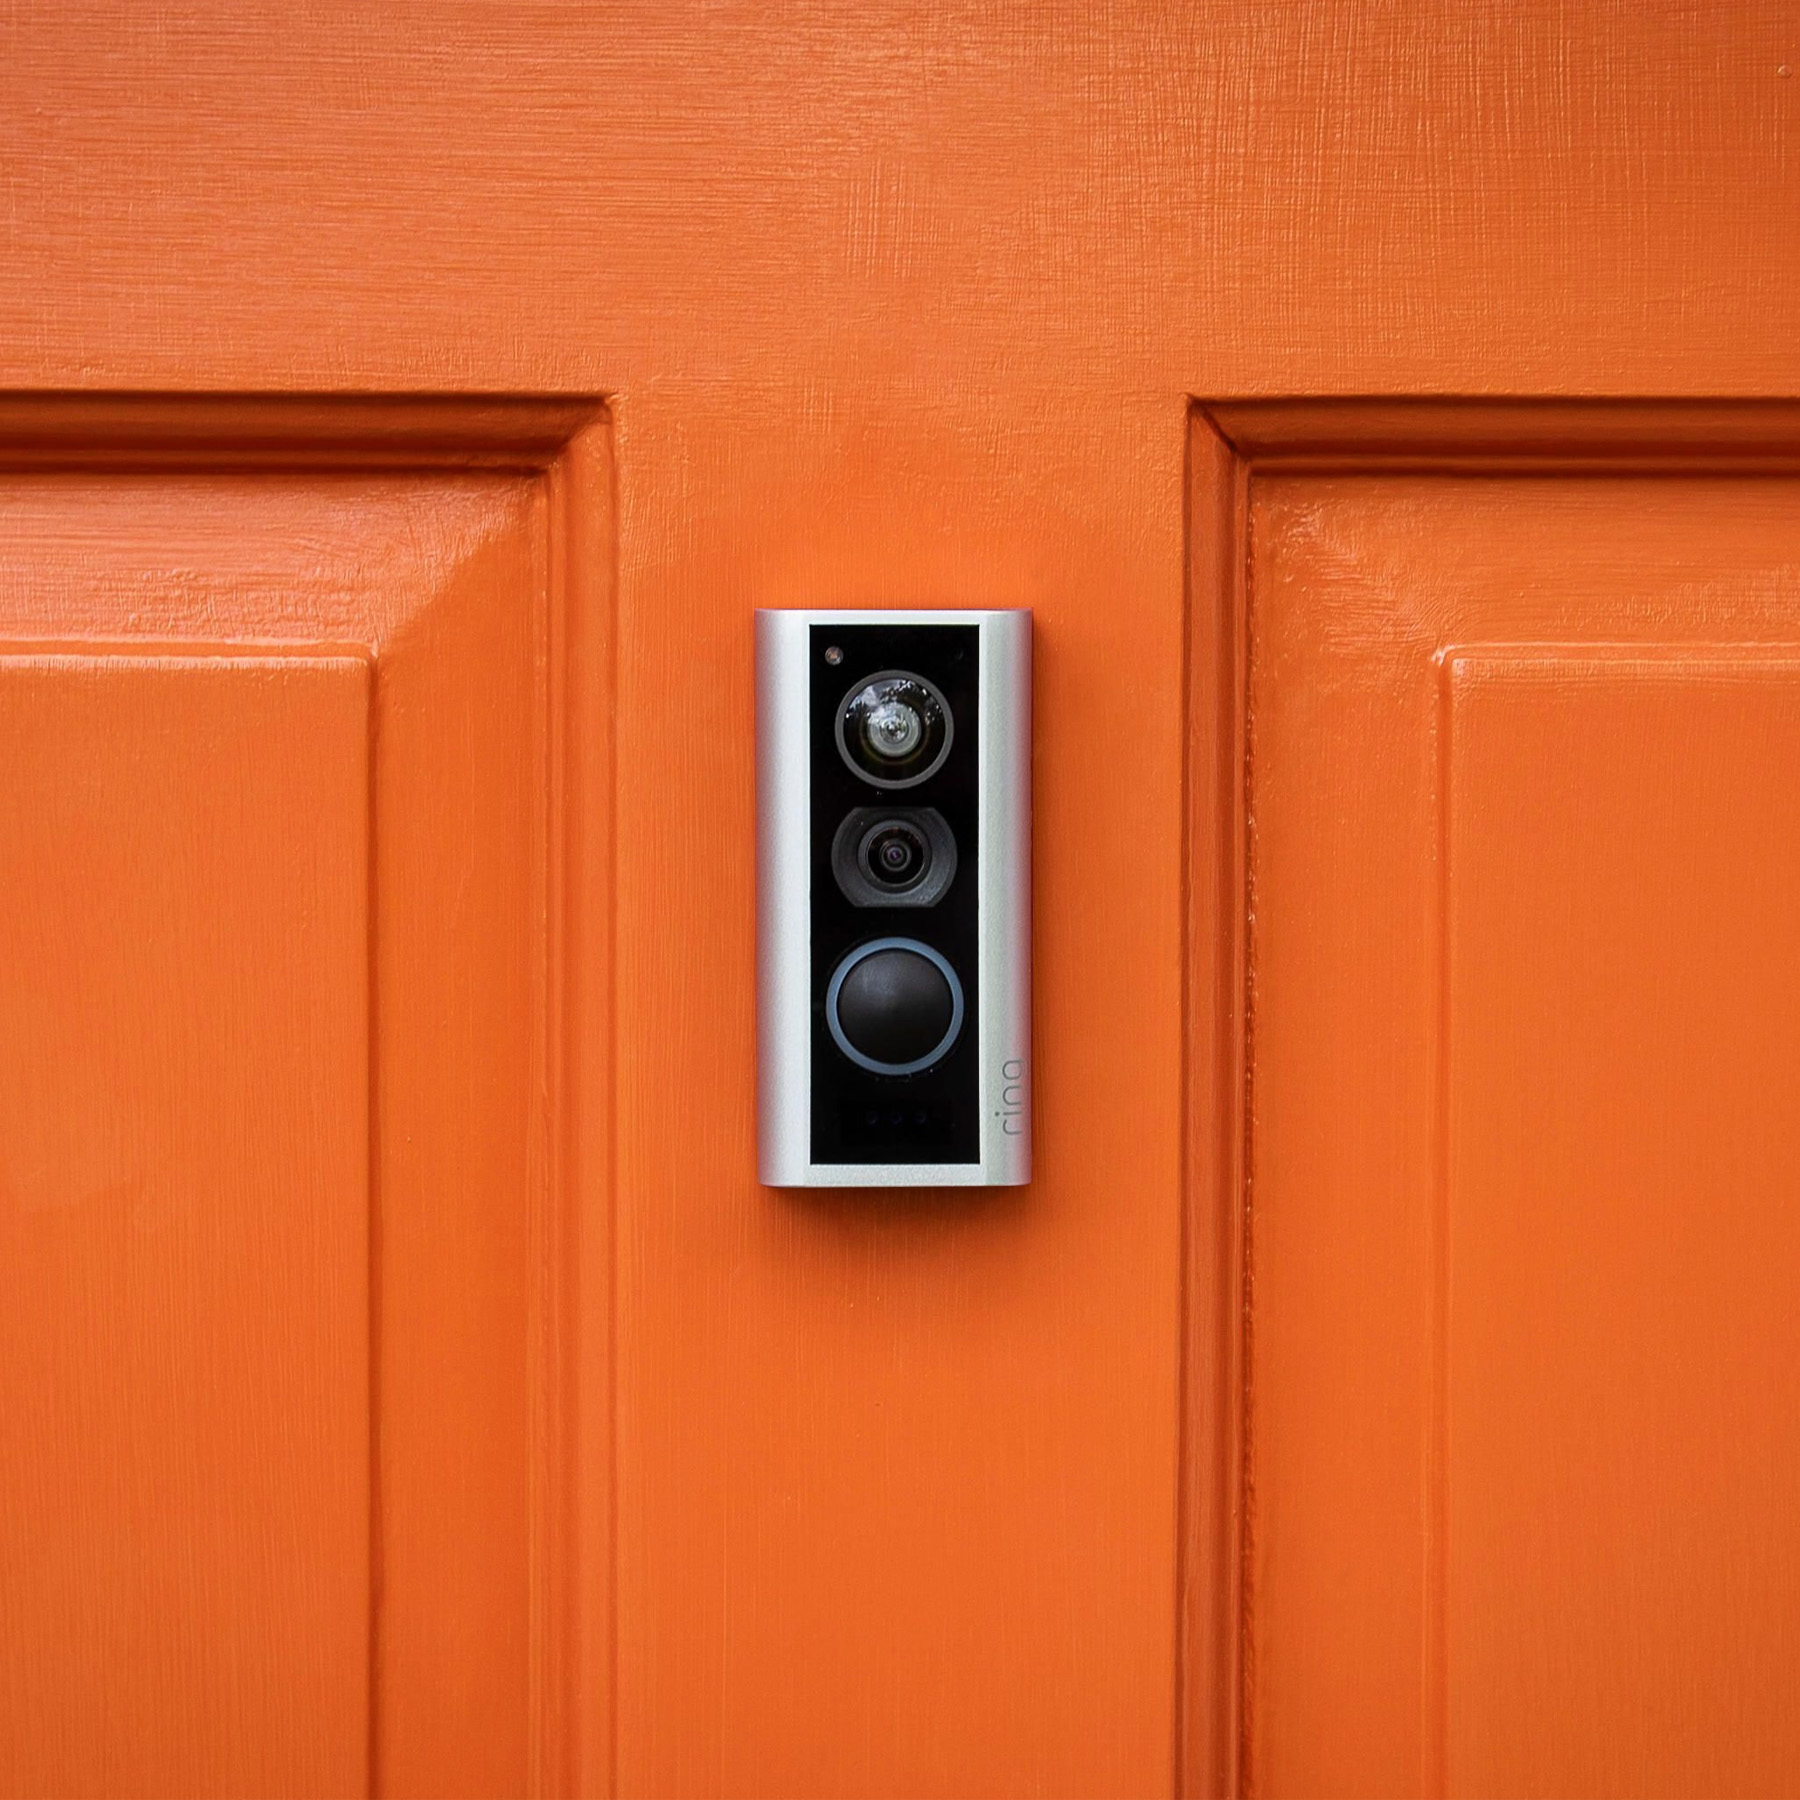 are ring doorbells allowed in apartments banner 3.0